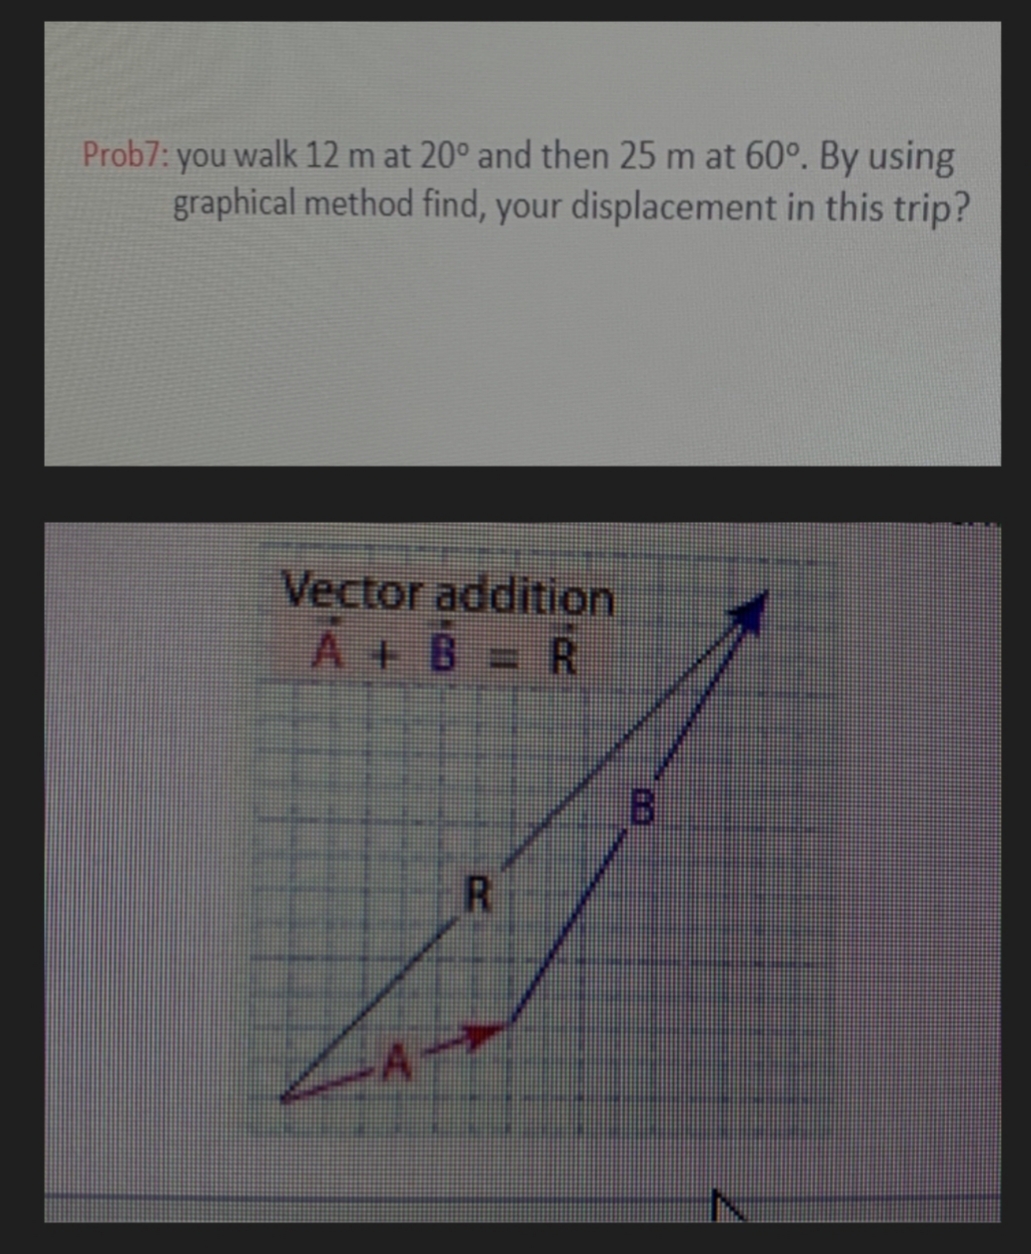 Prob7: you walk 12 m at 20° and then 25 m at 60°. By using
graphical method find, your displacement in this trip?
Vector addition
A+B = R
B.
R.
